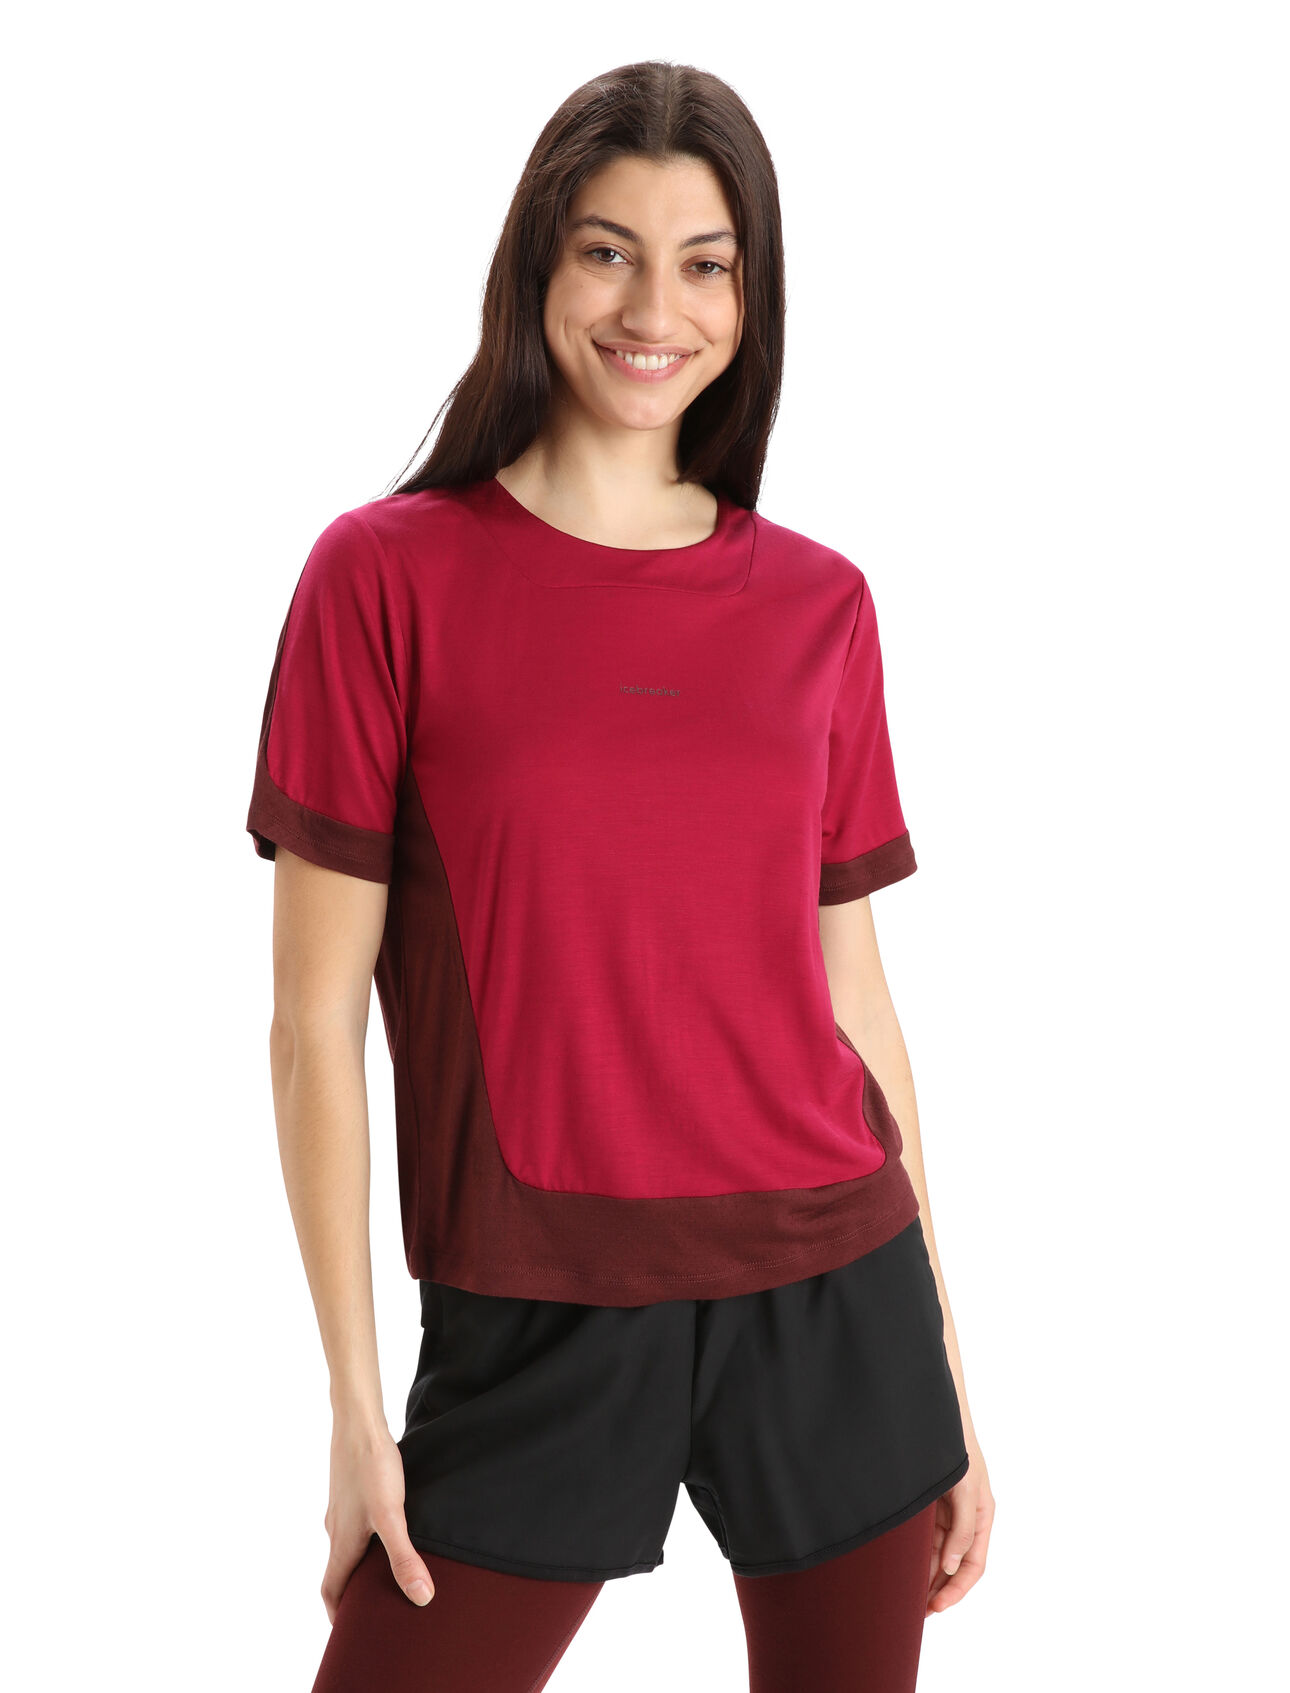 Womens ZoneKnit™ Merino Short Sleeve Boxy T-Shirt Our most breathable and lightweight tee designed for maximum breathability during high-output activities, the ZoneKnit™ Short Sleeve Boxy Tee combines Cool-Lite™ jersey fabric with our ZoneKnit™body-mapped ventilation.